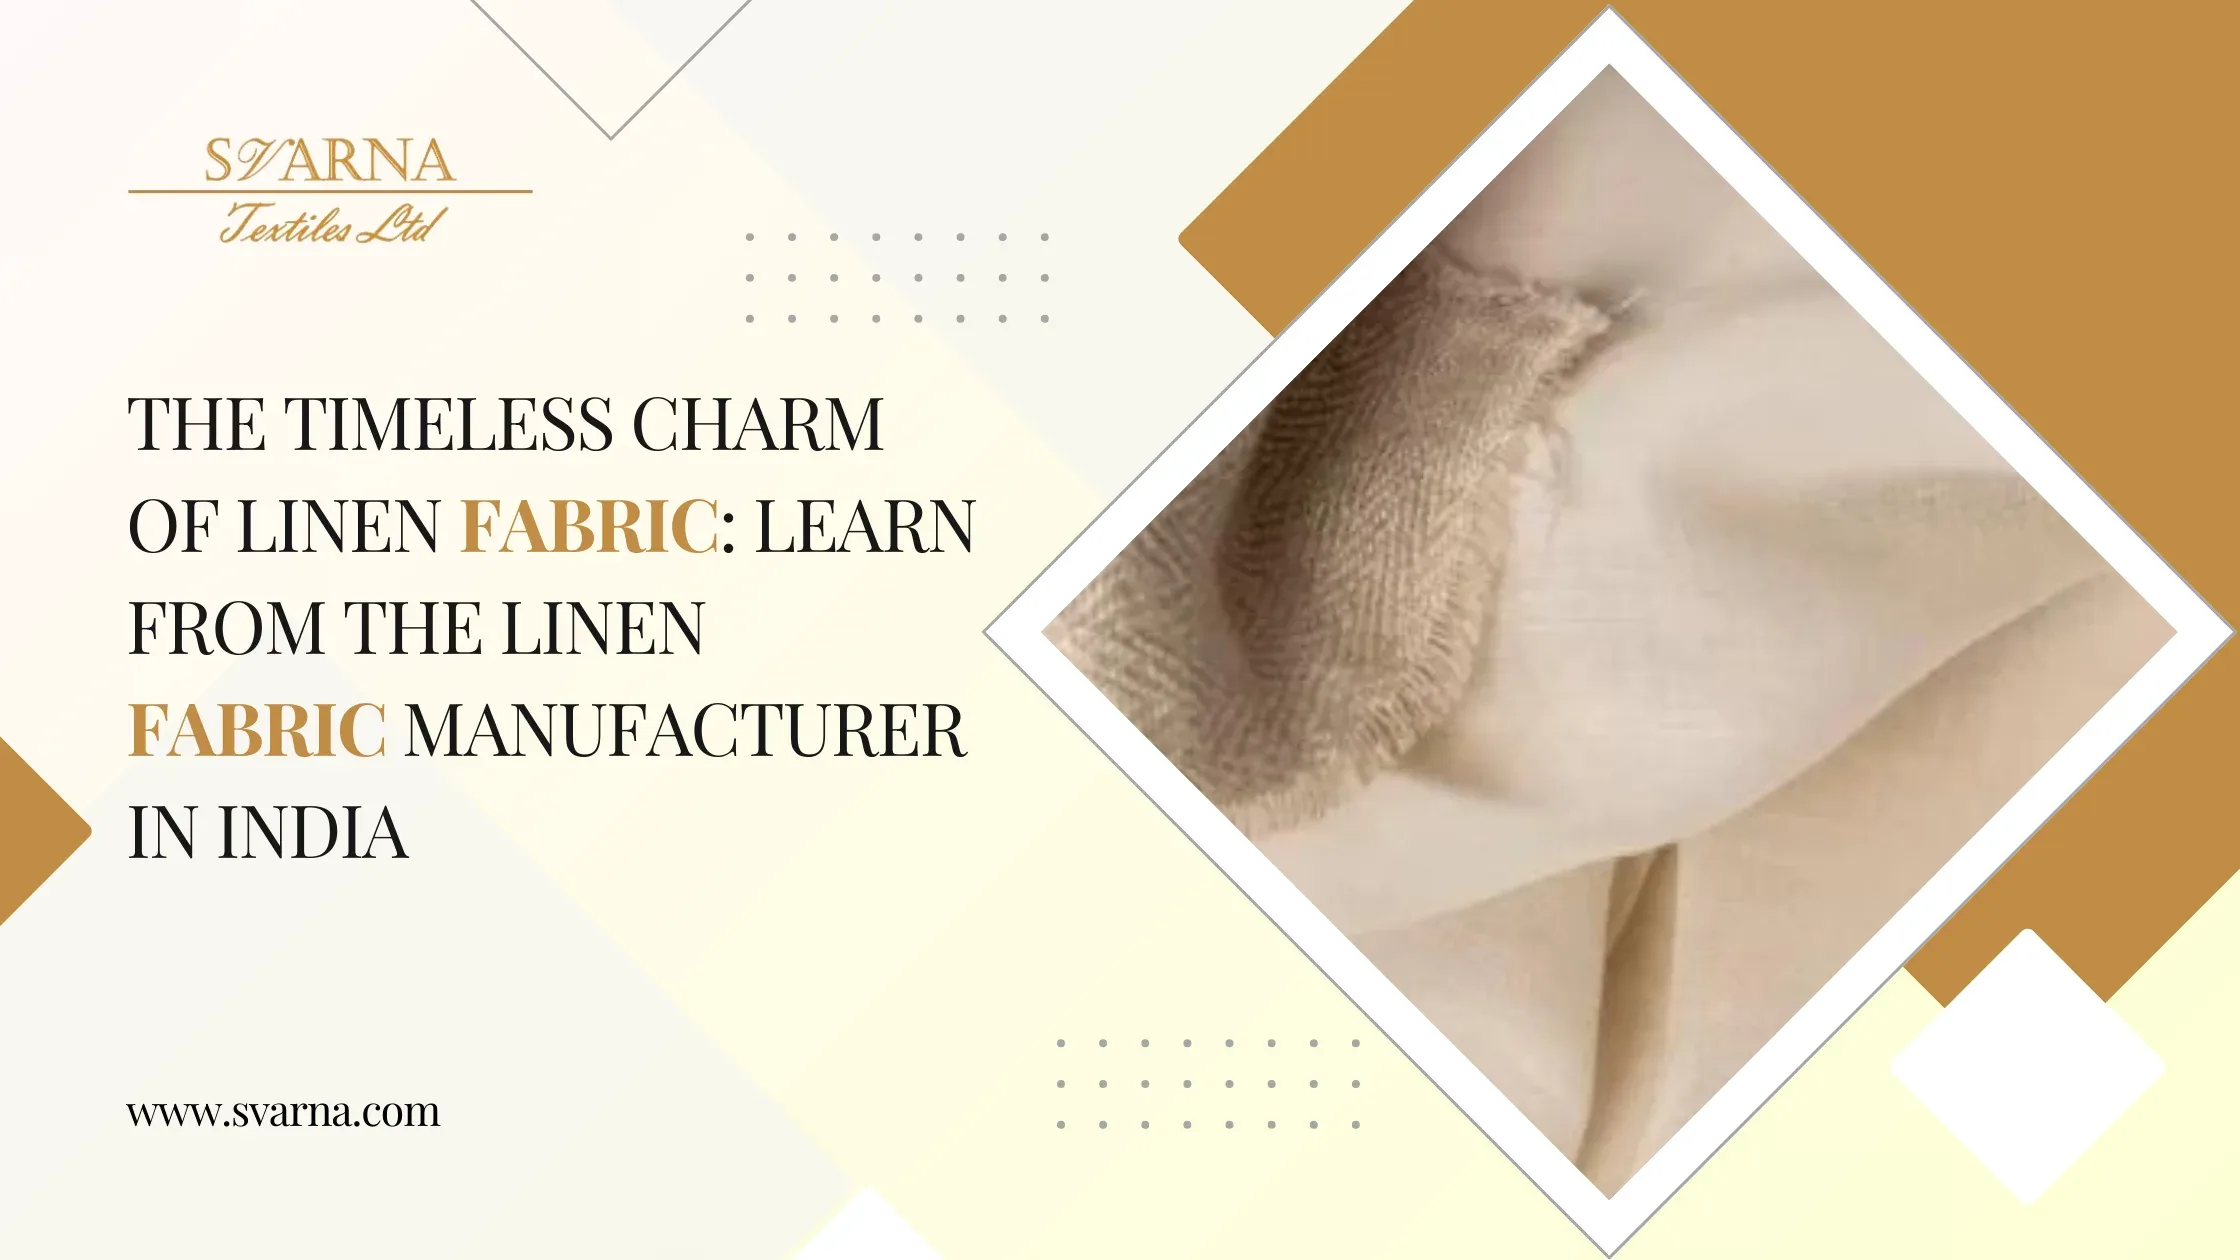 Linen Fabric Manufacturer In India